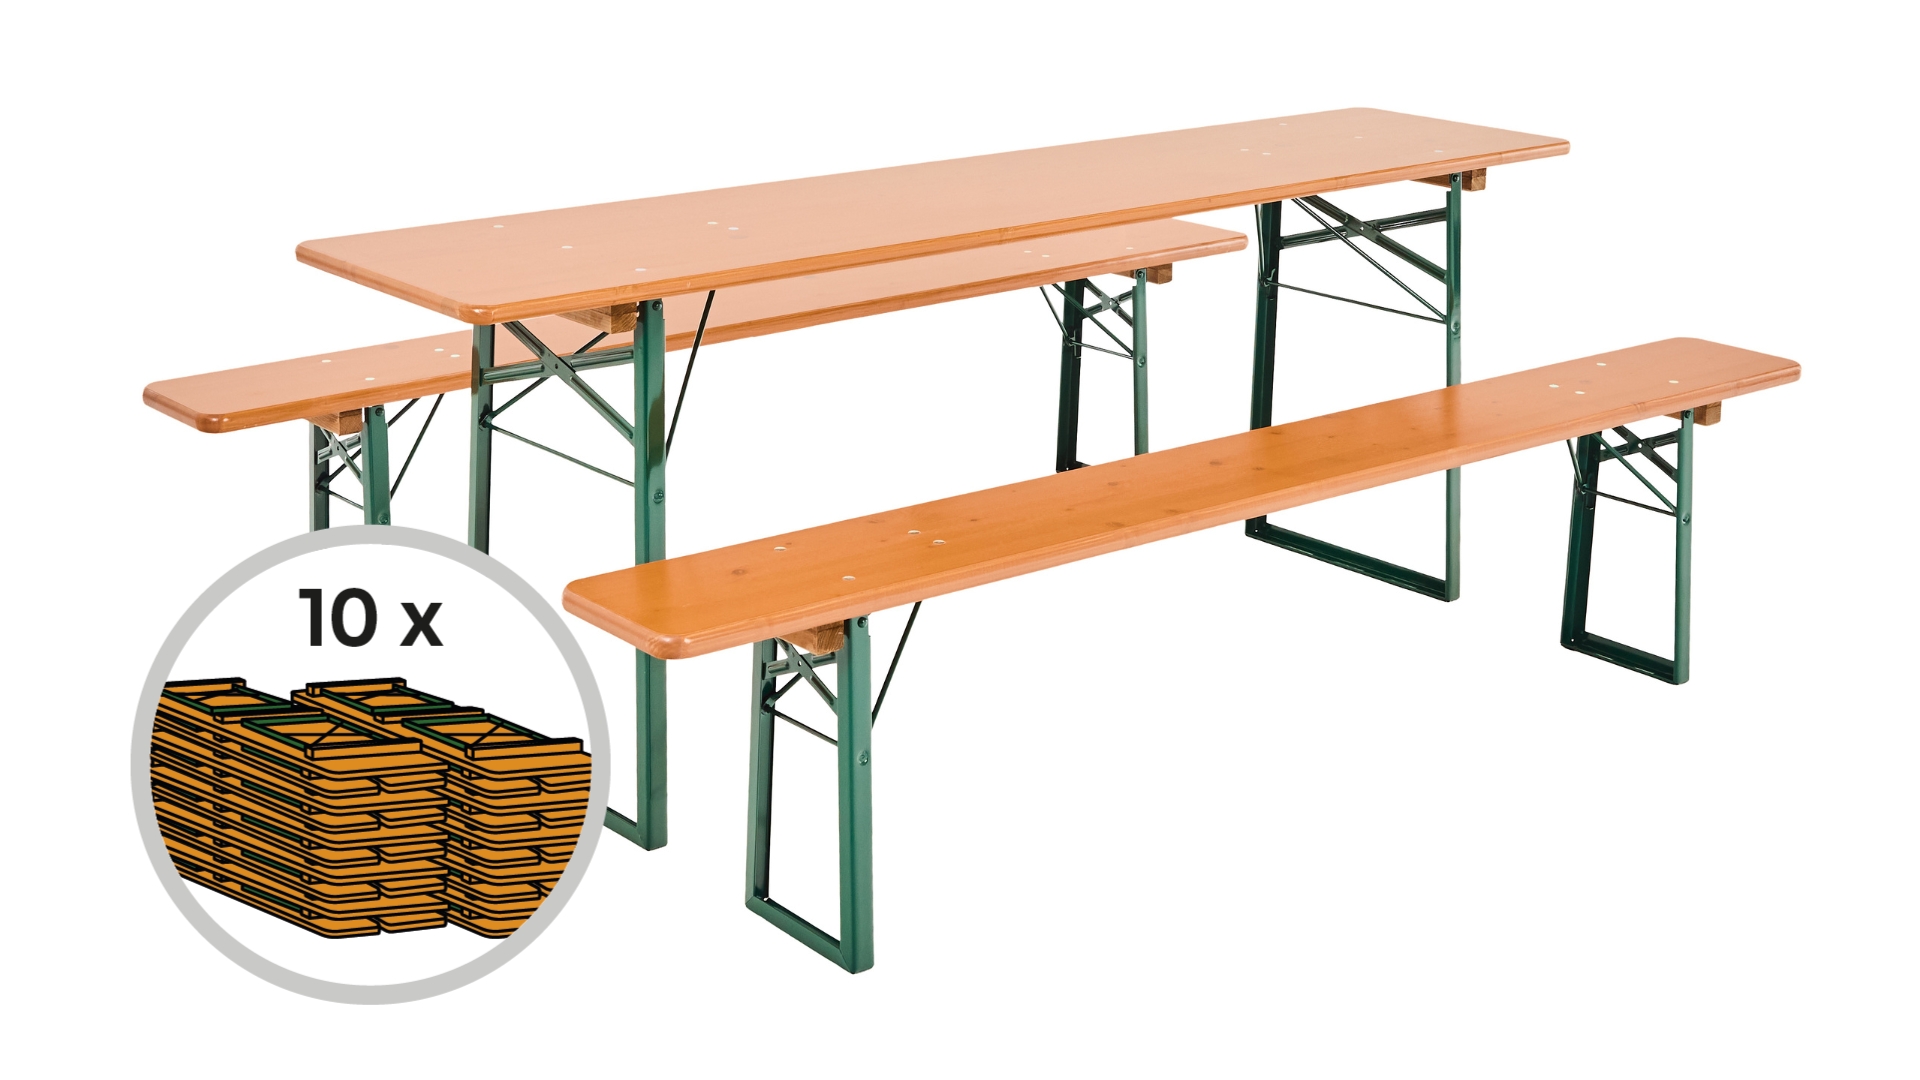 The classic set of 10 beer table sets in the color pine